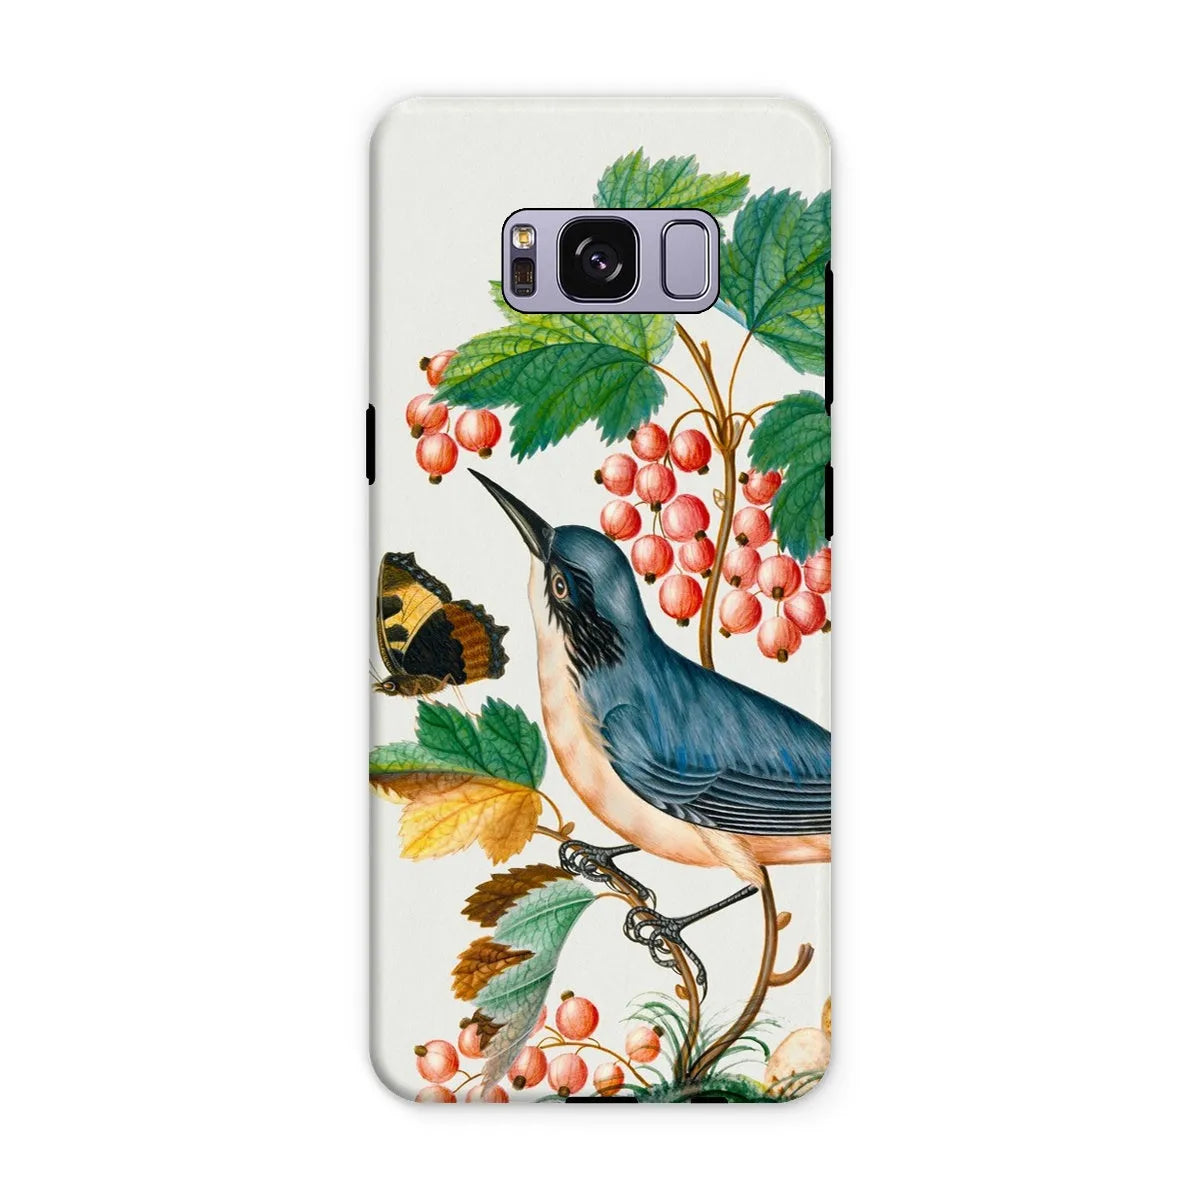 Warbler Admiral Wasps & Ants - Art Phone Case - James Bolton - Samsung Galaxy S8 Plus / Matte - Mobile Phone Cases